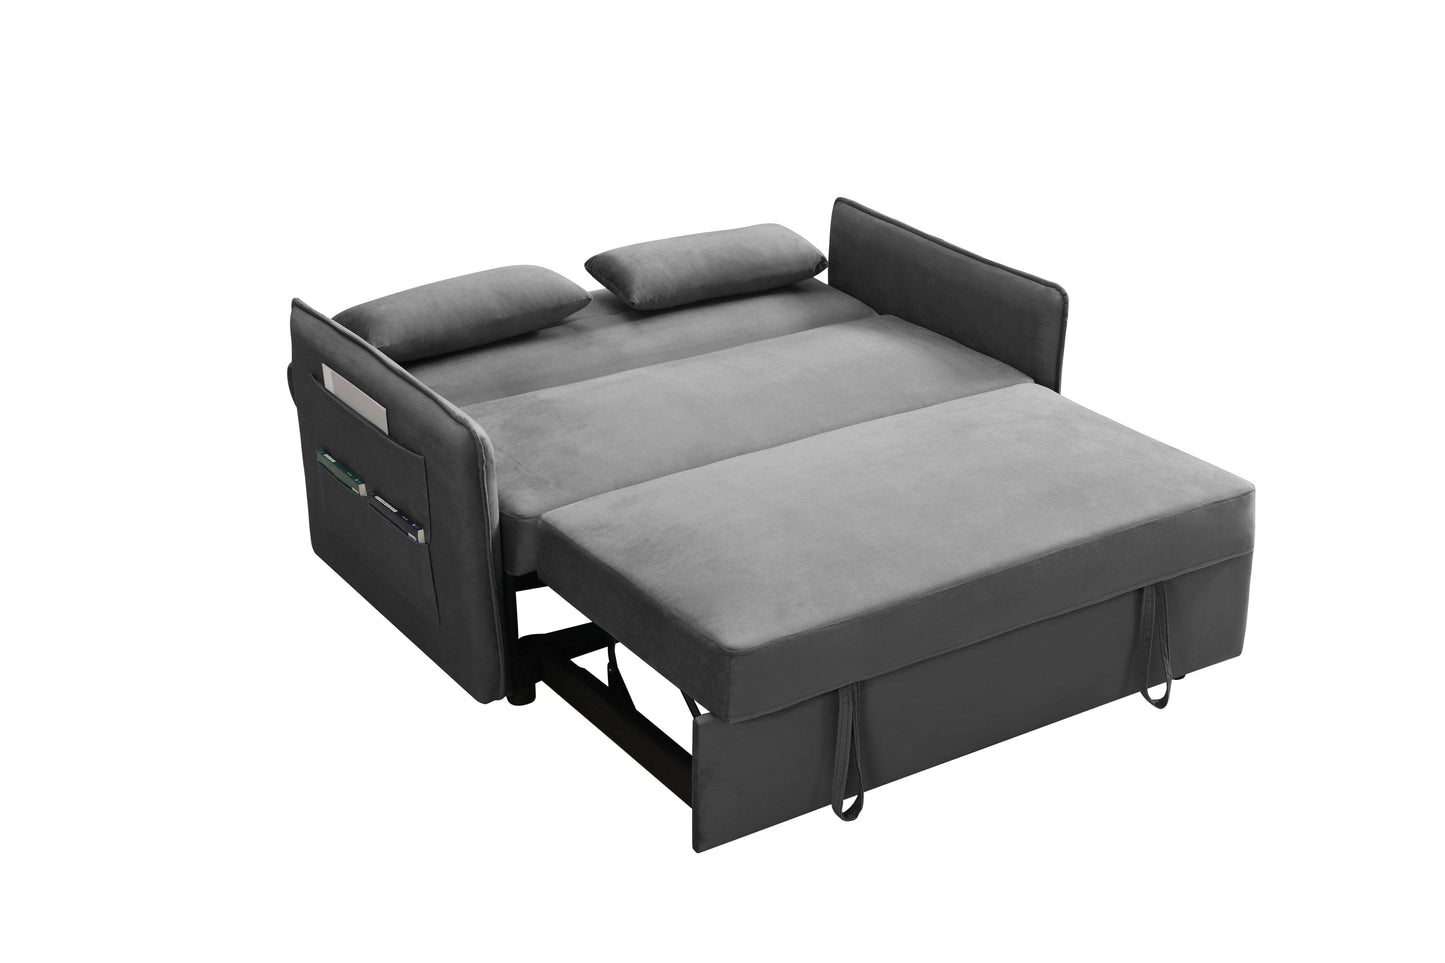 MEGA Pull Out Sofa Bed, Modern Adjustable Pull Out Bed Lounge Chair with 2 Side Pockets, 2 Pillows for Home Office